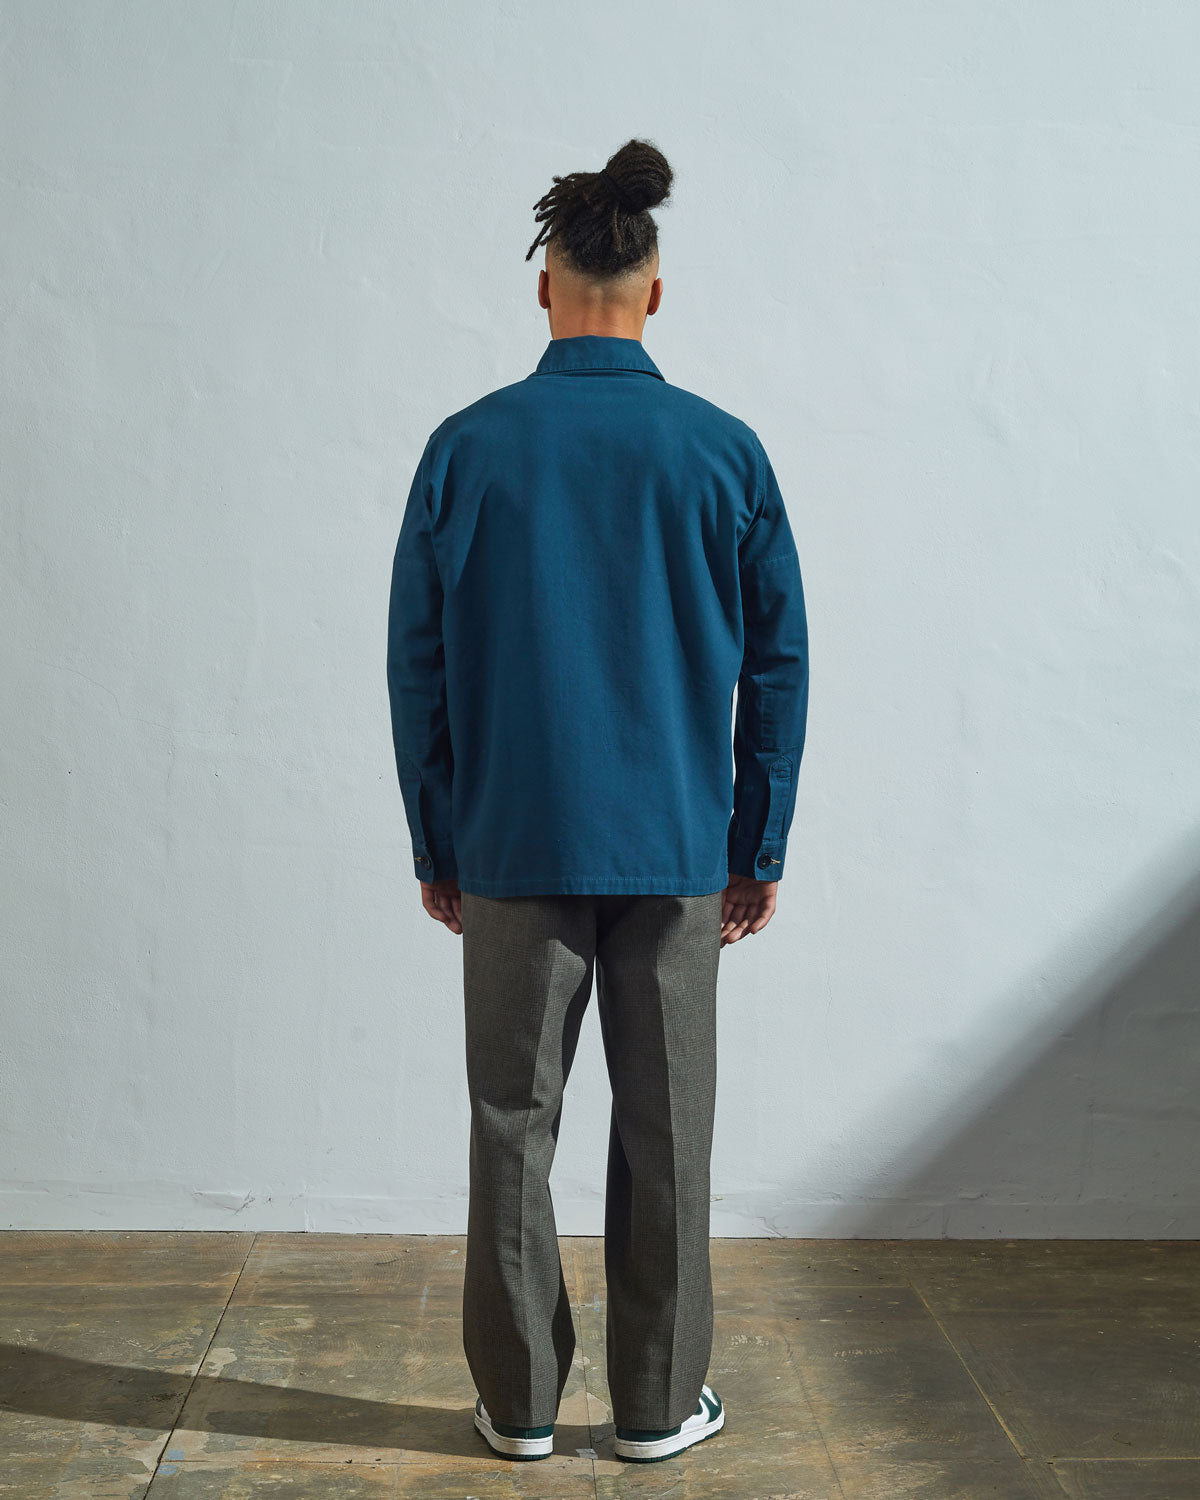 Back view of model wearing Uskees men's shirt jacket #3011 in peacock organic cotton showing reinforced elbows.